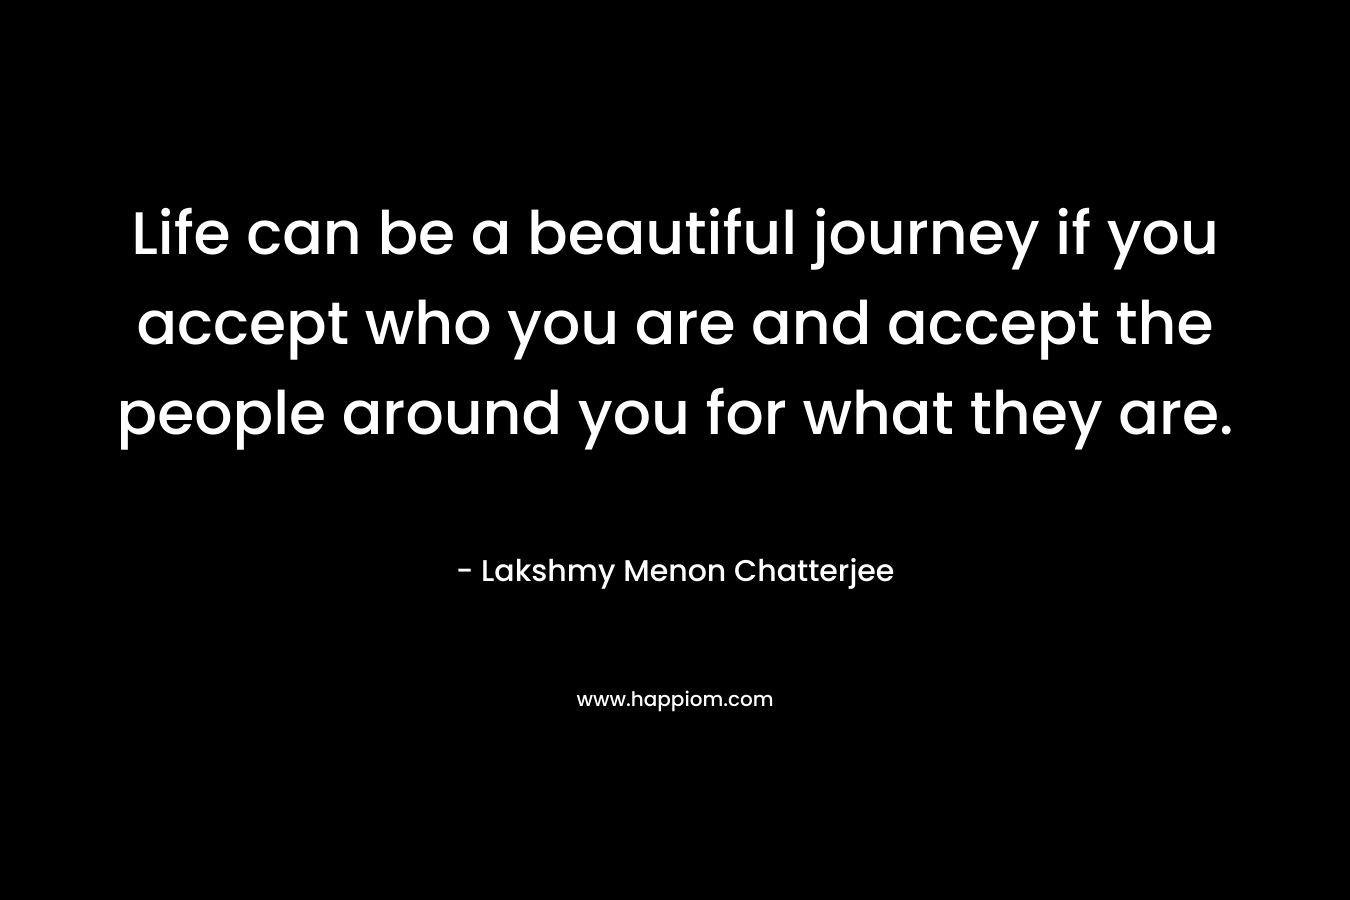 Life can be a beautiful journey if you accept who you are and accept the people around you for what they are.